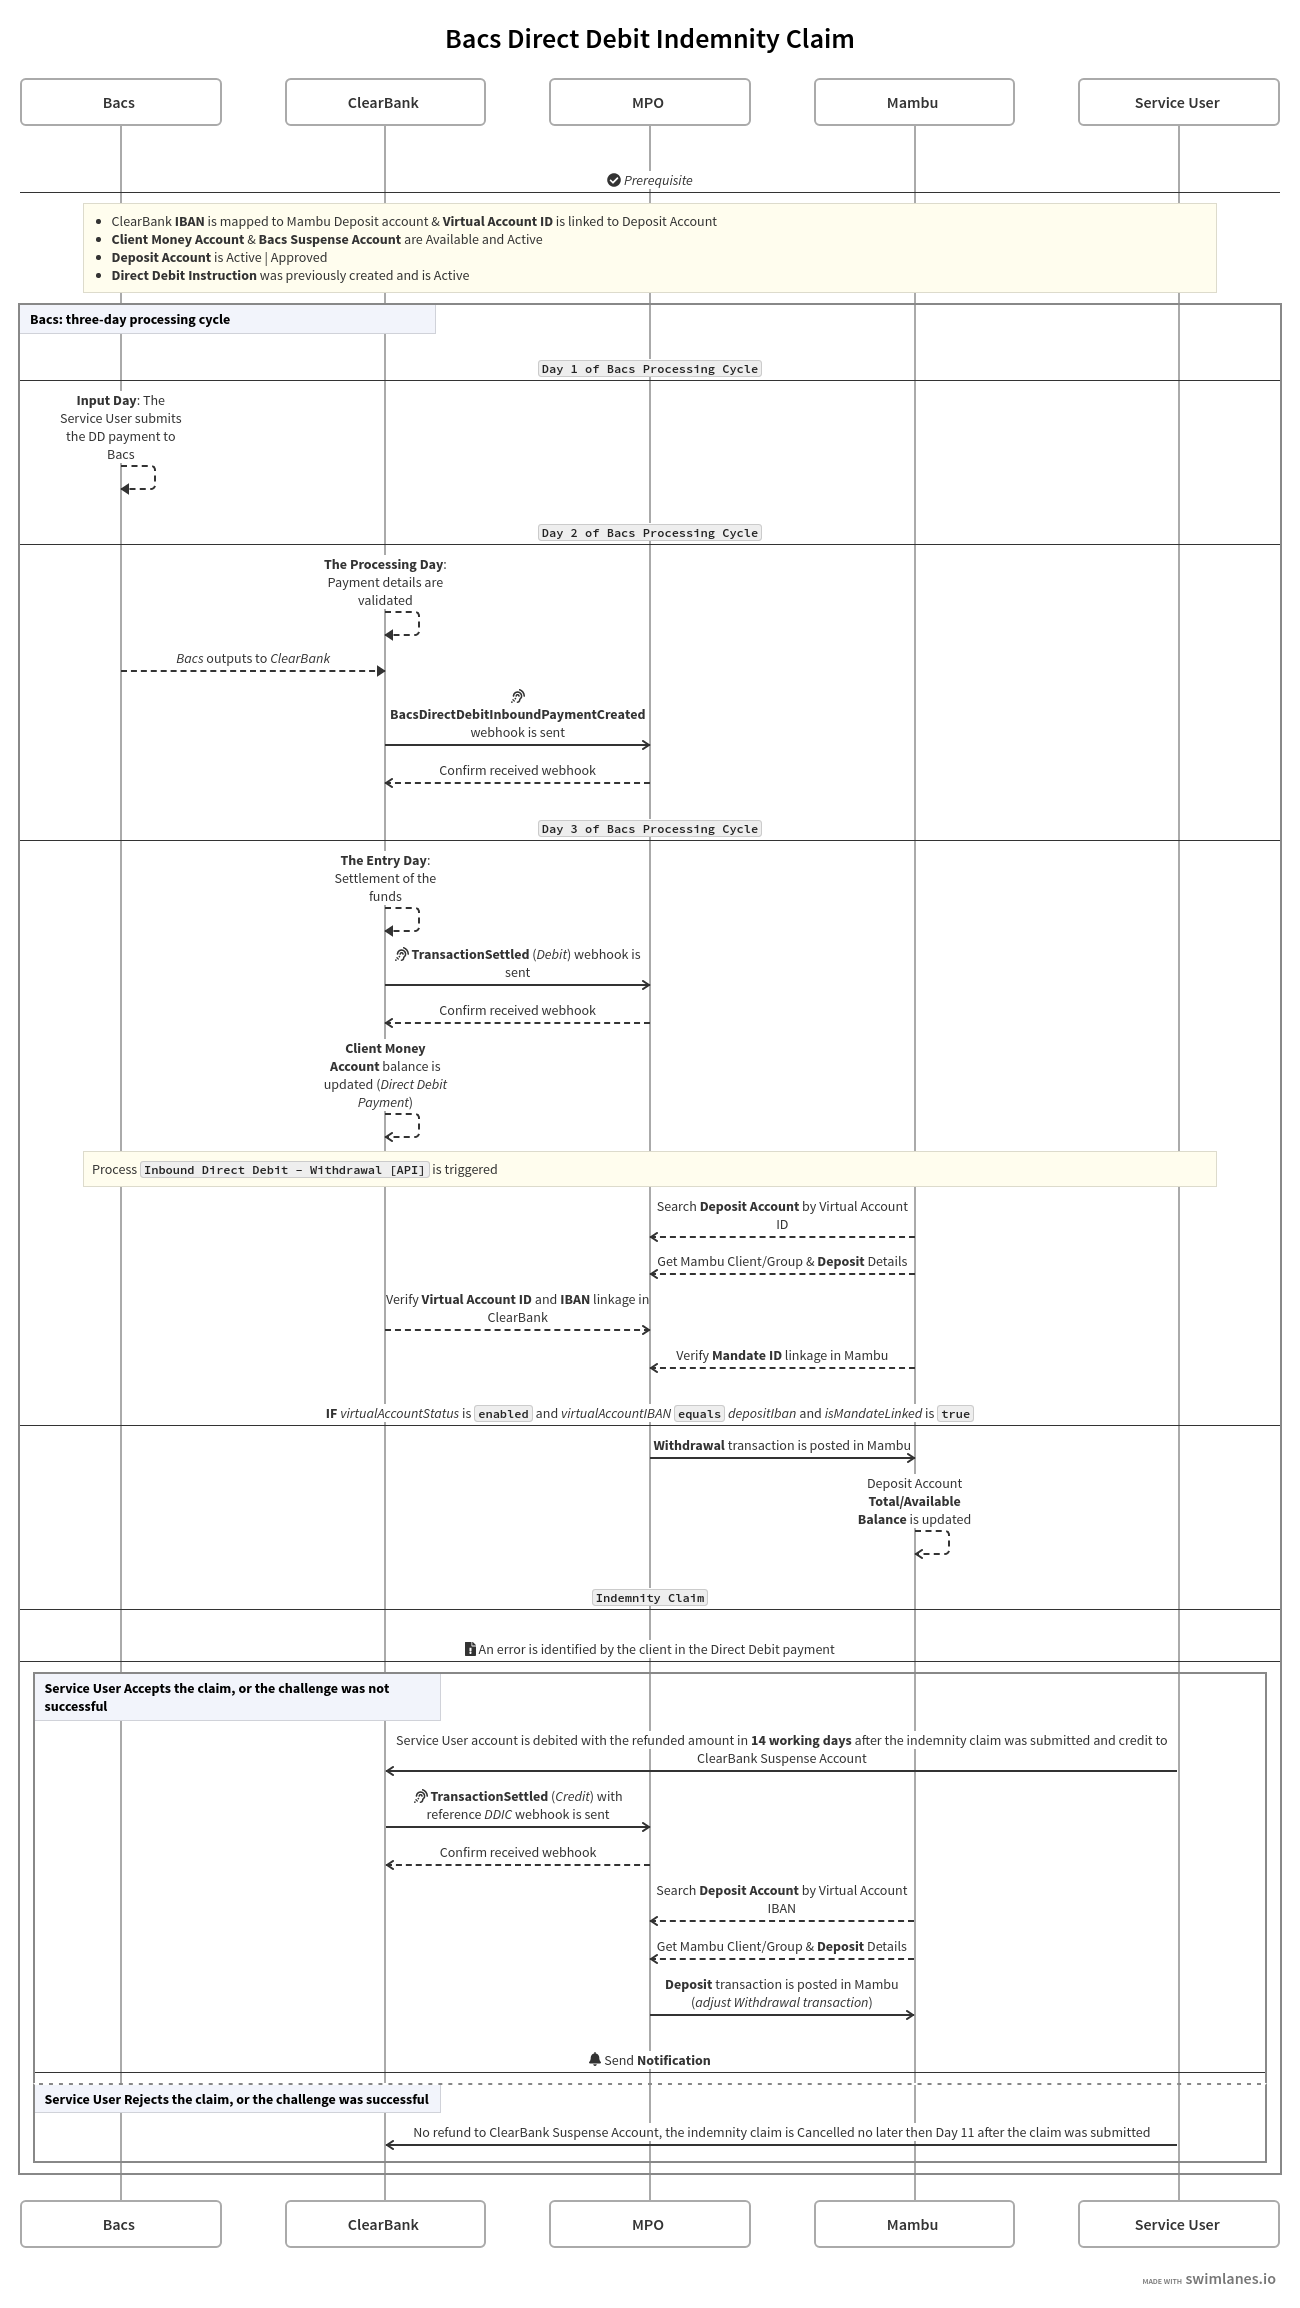 Sequence diagram showing the Direct Debit Indemnity Claim flow between Bacs, MPO, Mambu, and ClearBank